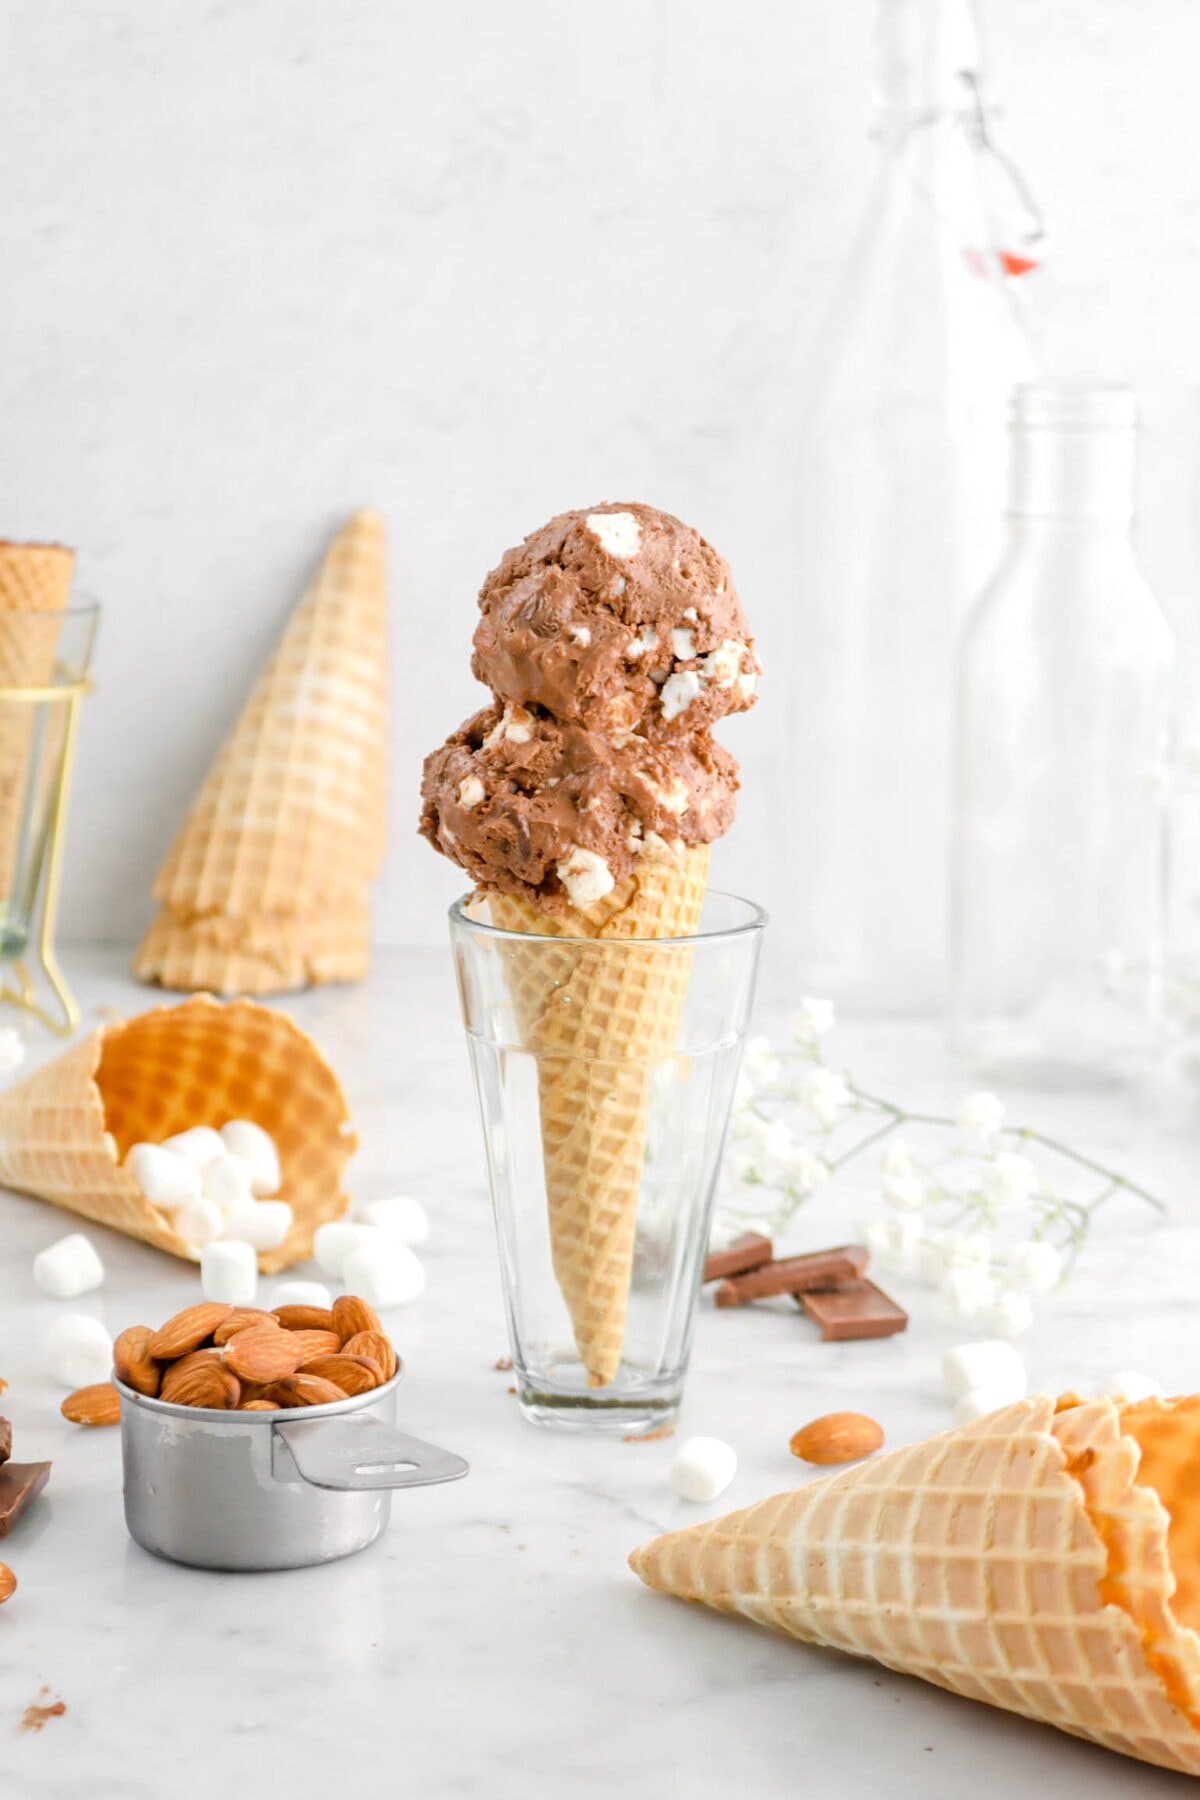 ice cream in glass standing up with cones around, mini marshmallows, almonds, and chocolate pieces on marble surface